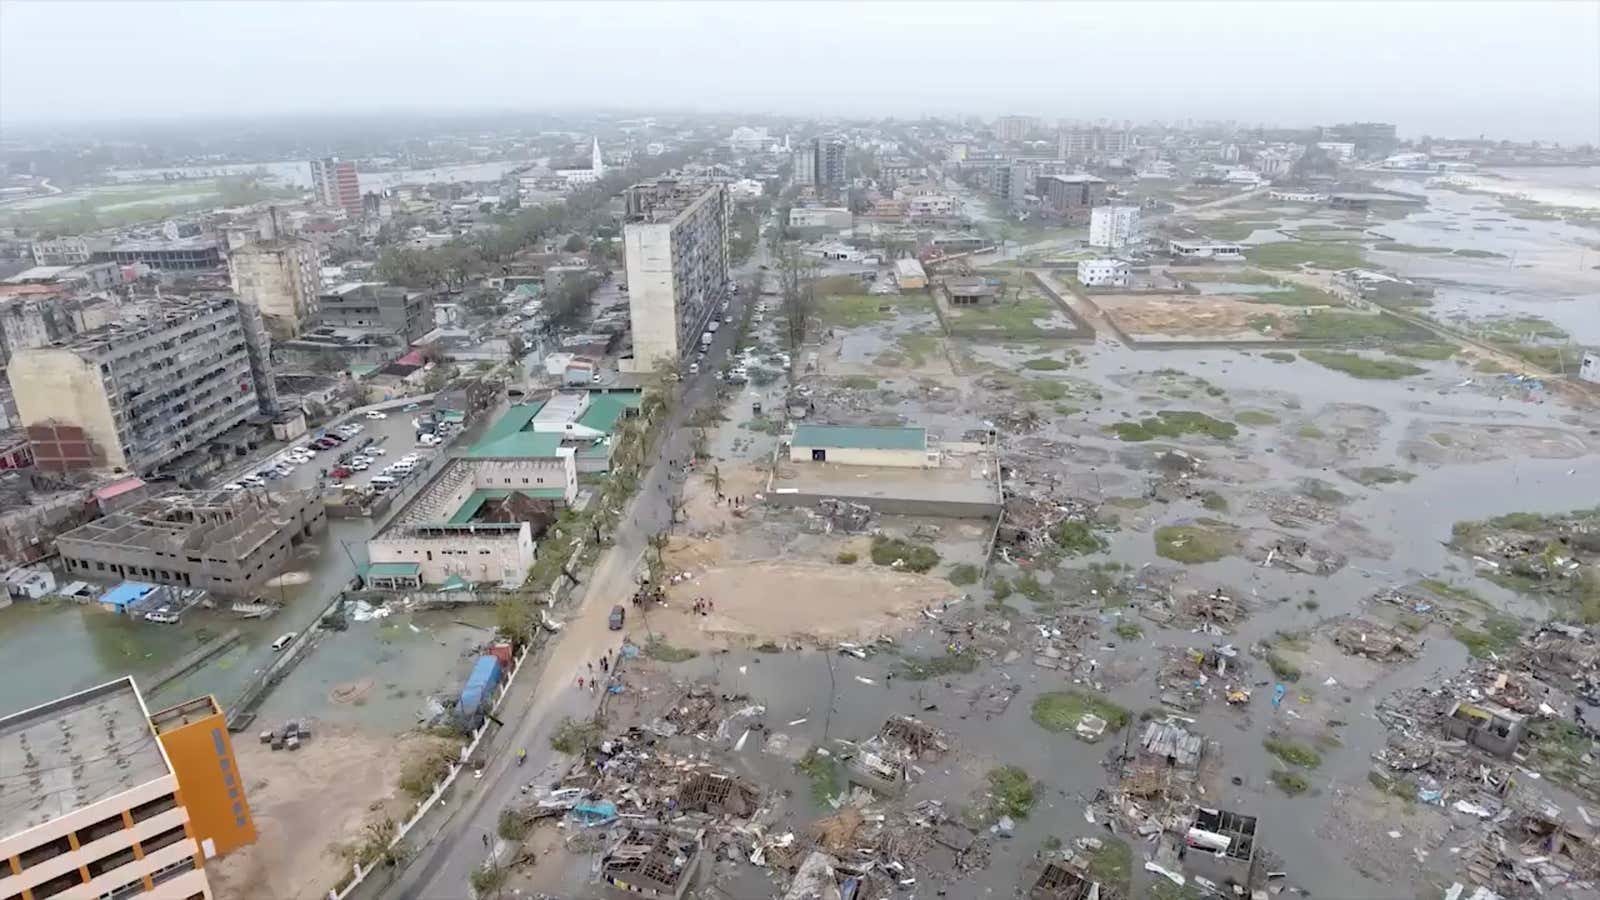 A general view of the damage after a cyclone swept through Beira, Mozambique. Mar. 18, 2019.